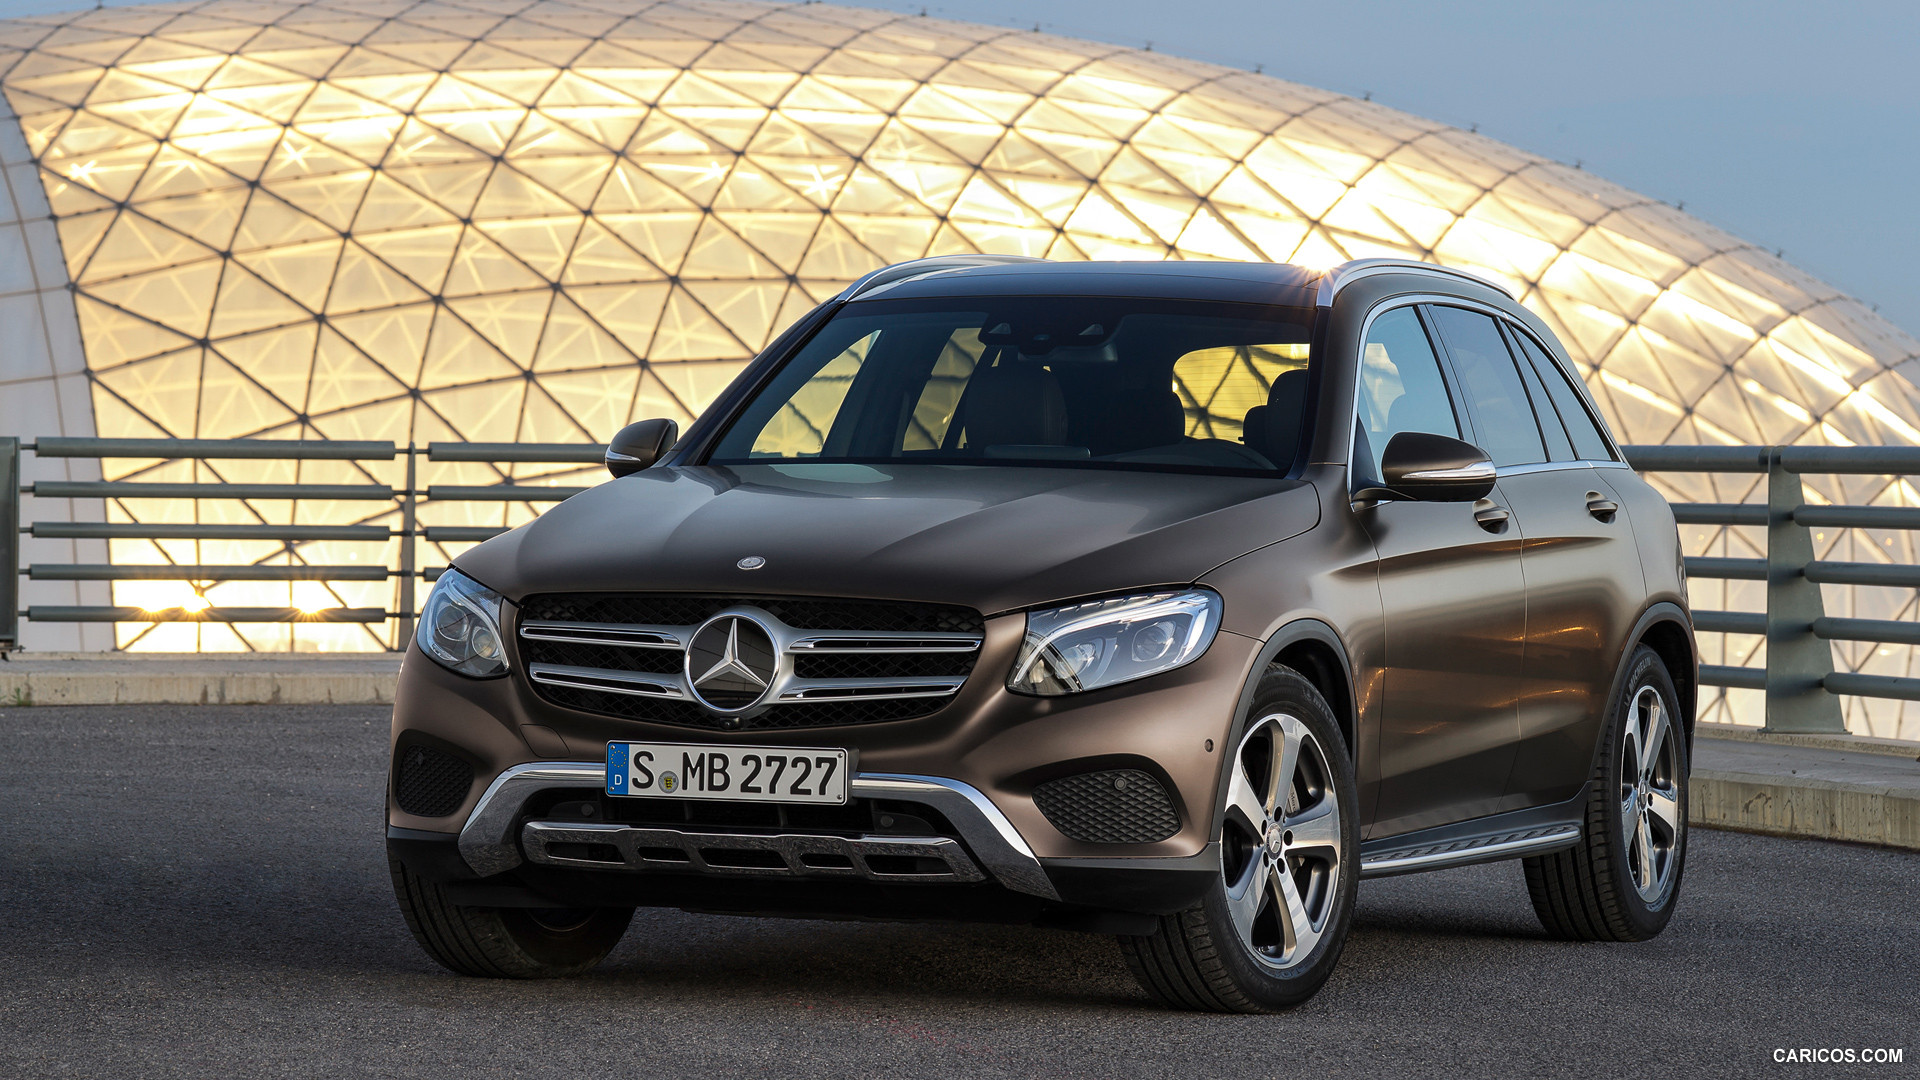 2016 Mercedes-Benz GLC-Class GLC 250d 4MATIC (Citrine Brown Magno, Offroad Line) - Front, #20 of 254